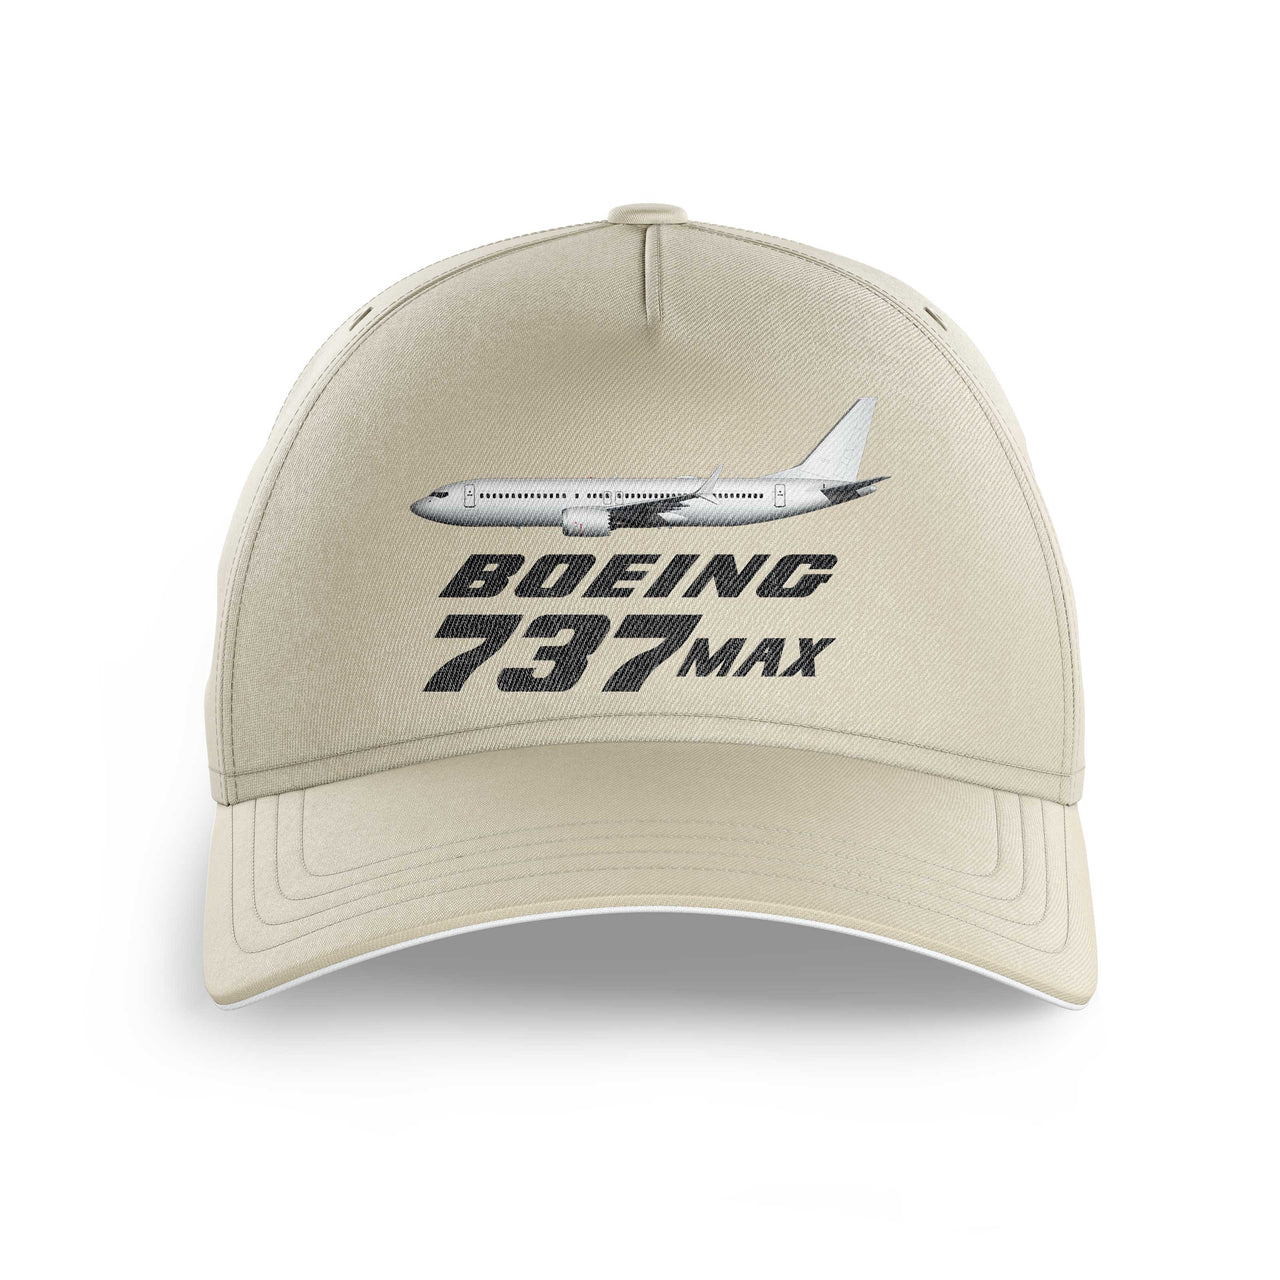 The Boeing 737Max Printed Hats